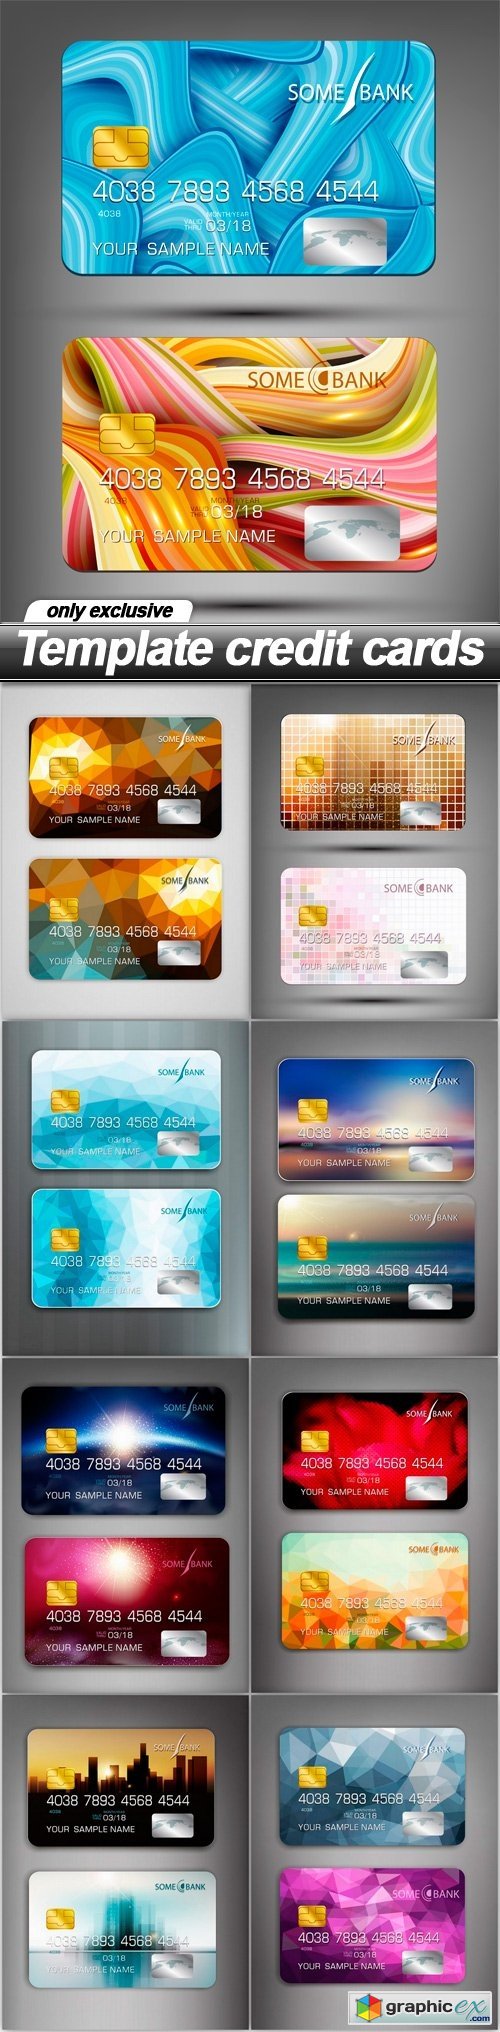 Template credit cards - 9 EPS